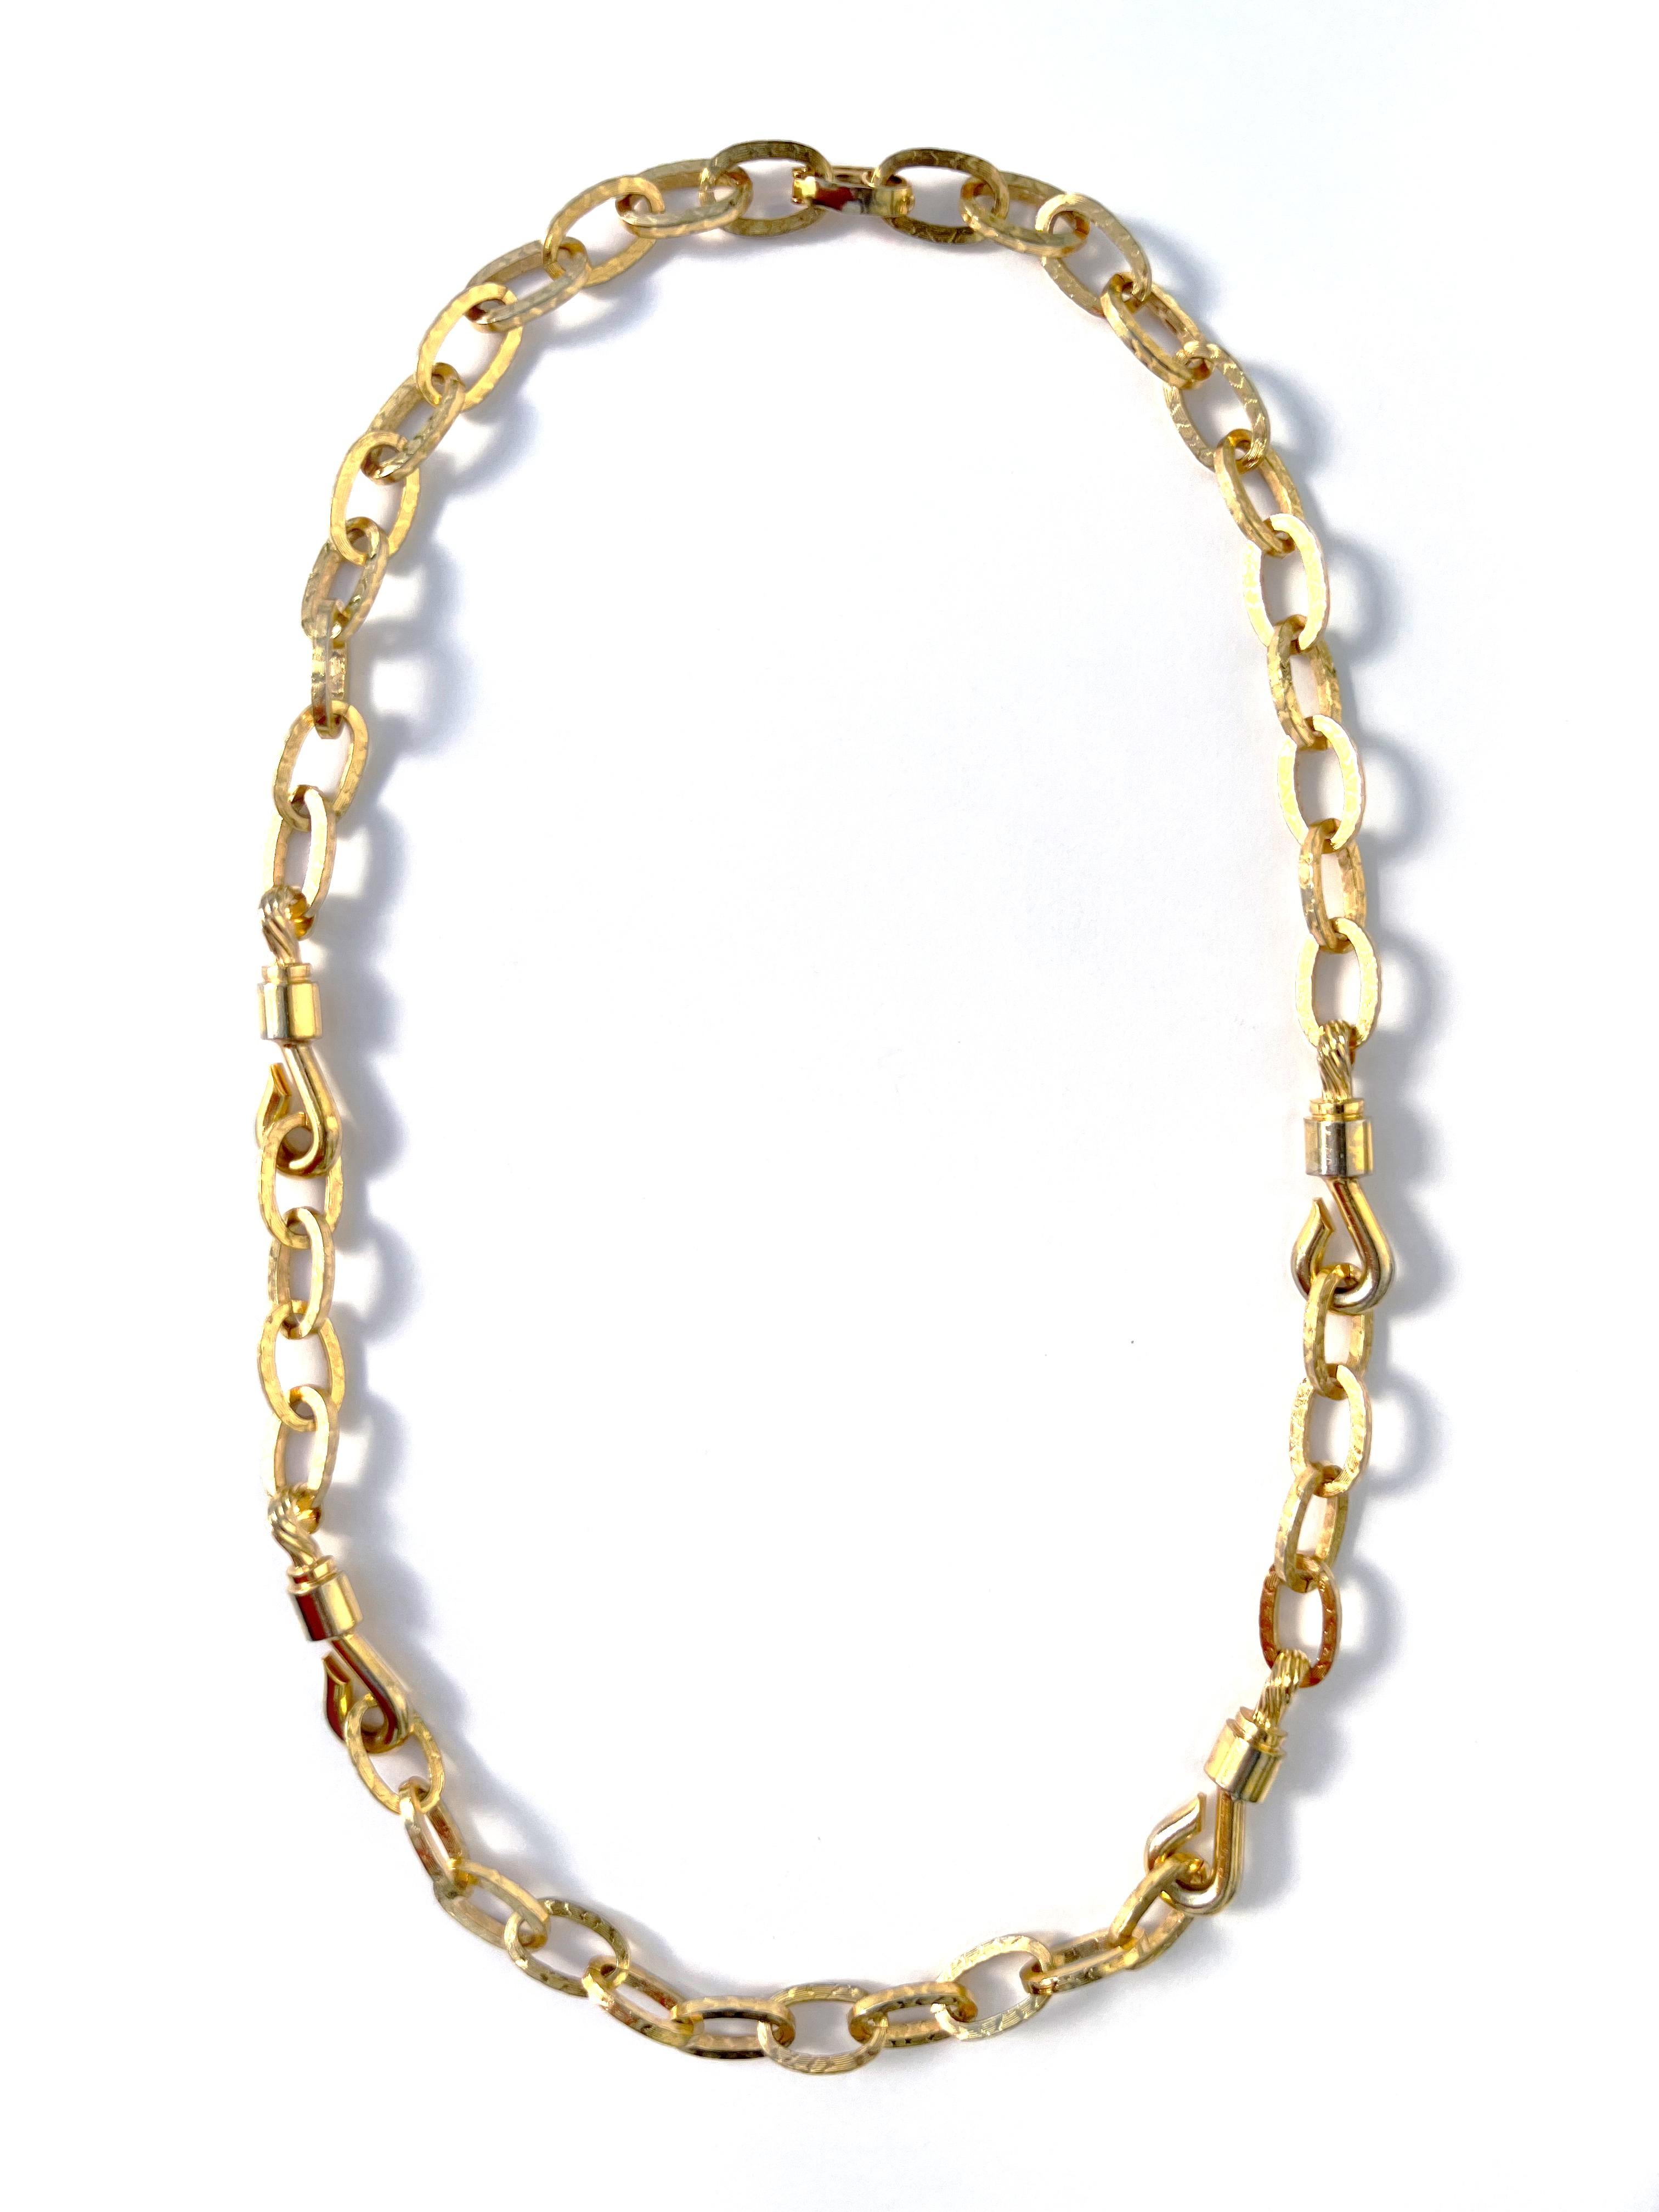 Vintage Christian Dior long chain necklace in gold plate, dated 1972.  This long and substantial heritage necklace features chunky flat-sided oval-shaped chain links with an intricately patterned finish, punctuated at intervals by four jaunty